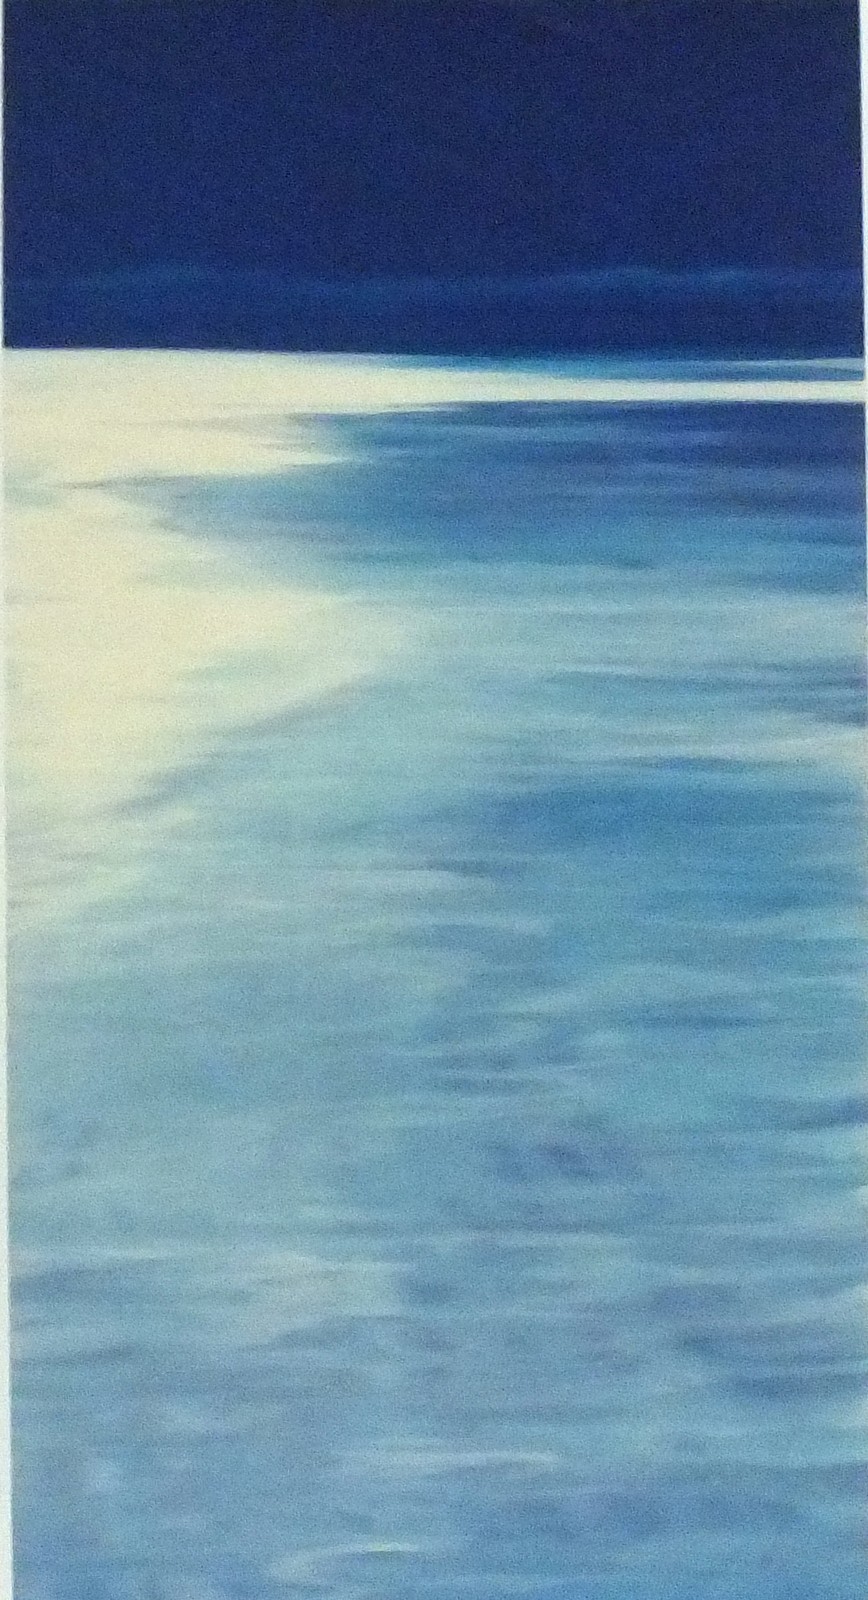 Penelope H STAREY (British 20th Century) Seascape, Lithograph, Signed and numbered 4/175 in pencil - Image 3 of 6